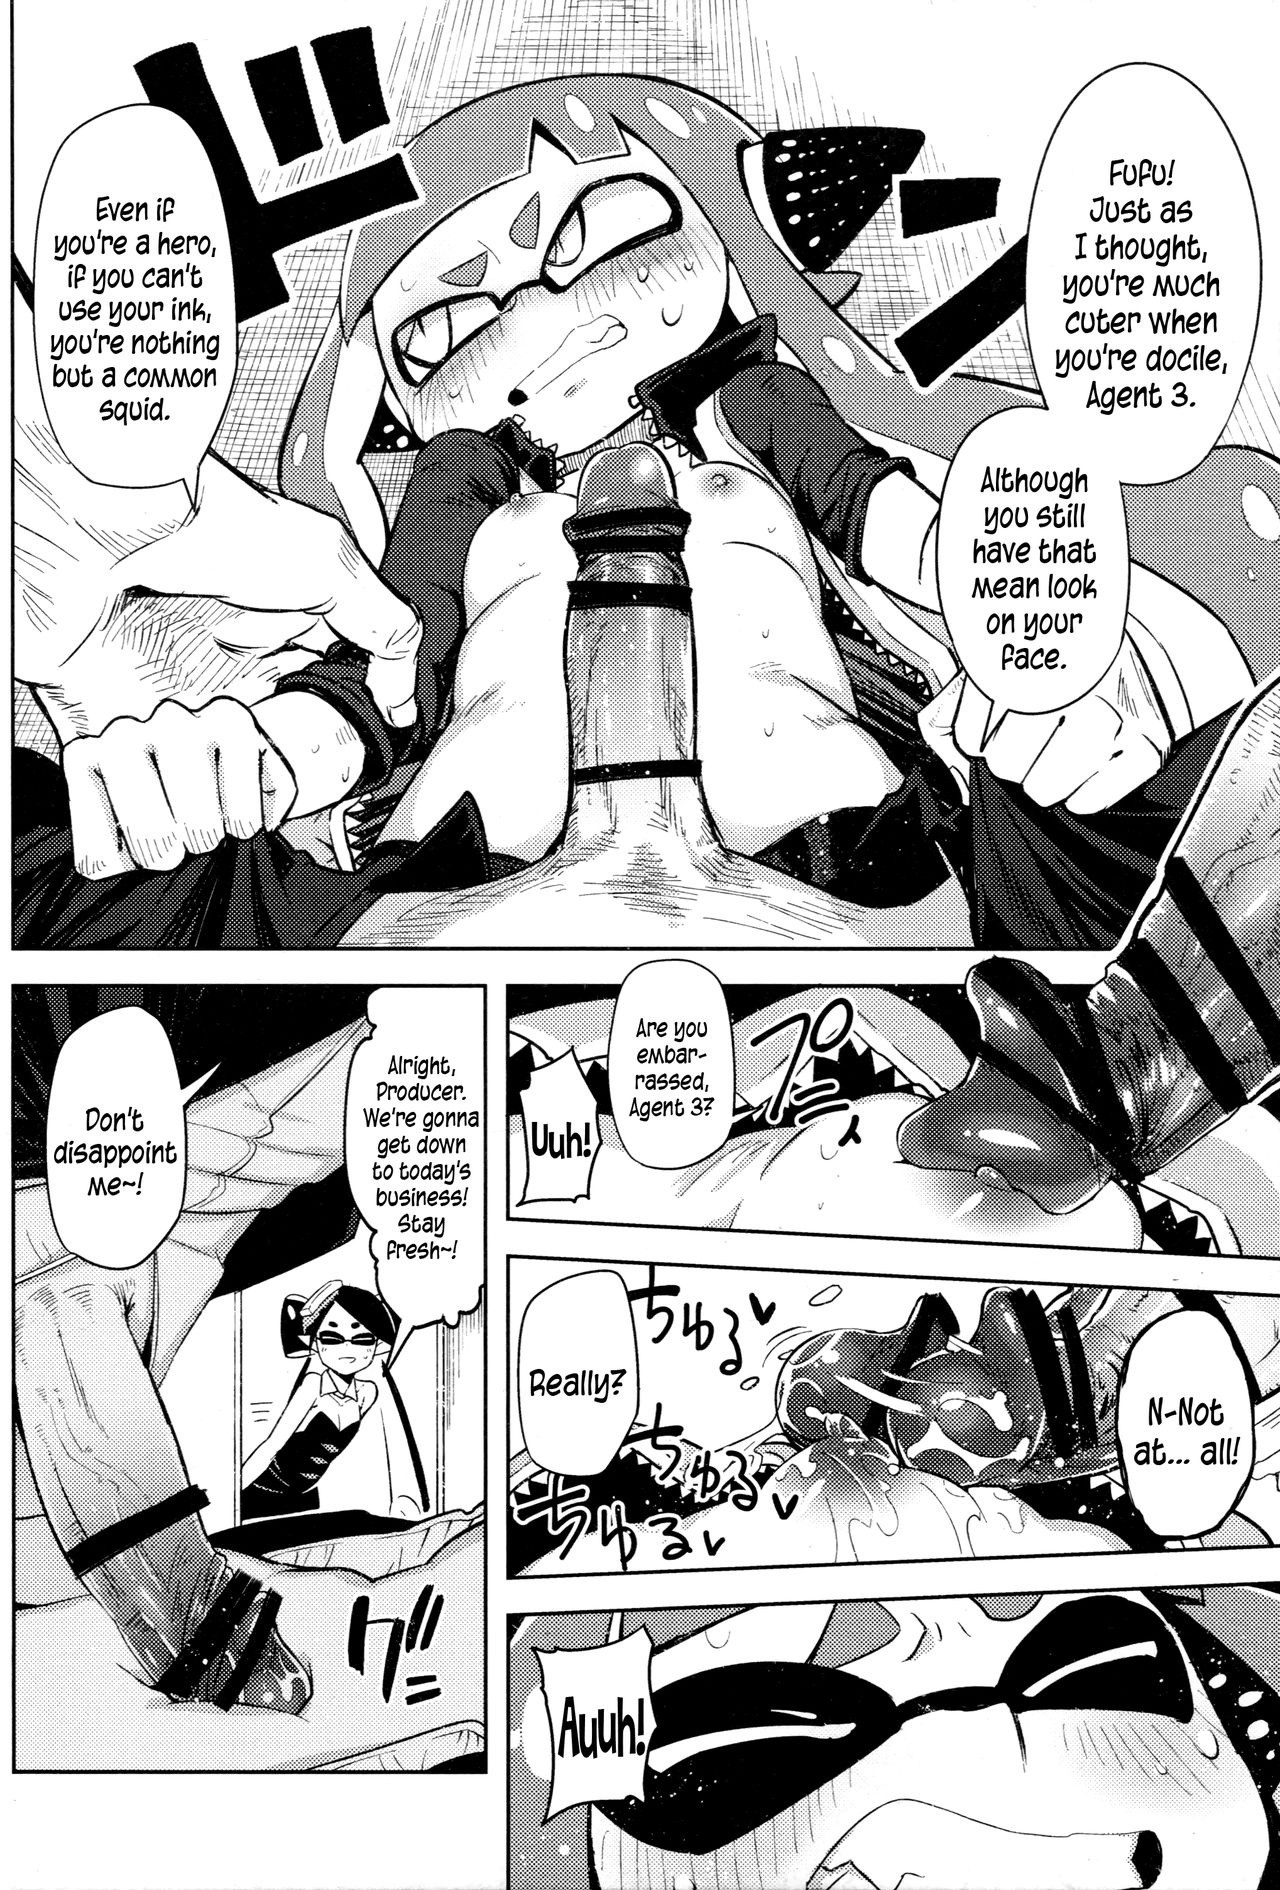 Hero by a Hair's Breadth hentai manga picture 10